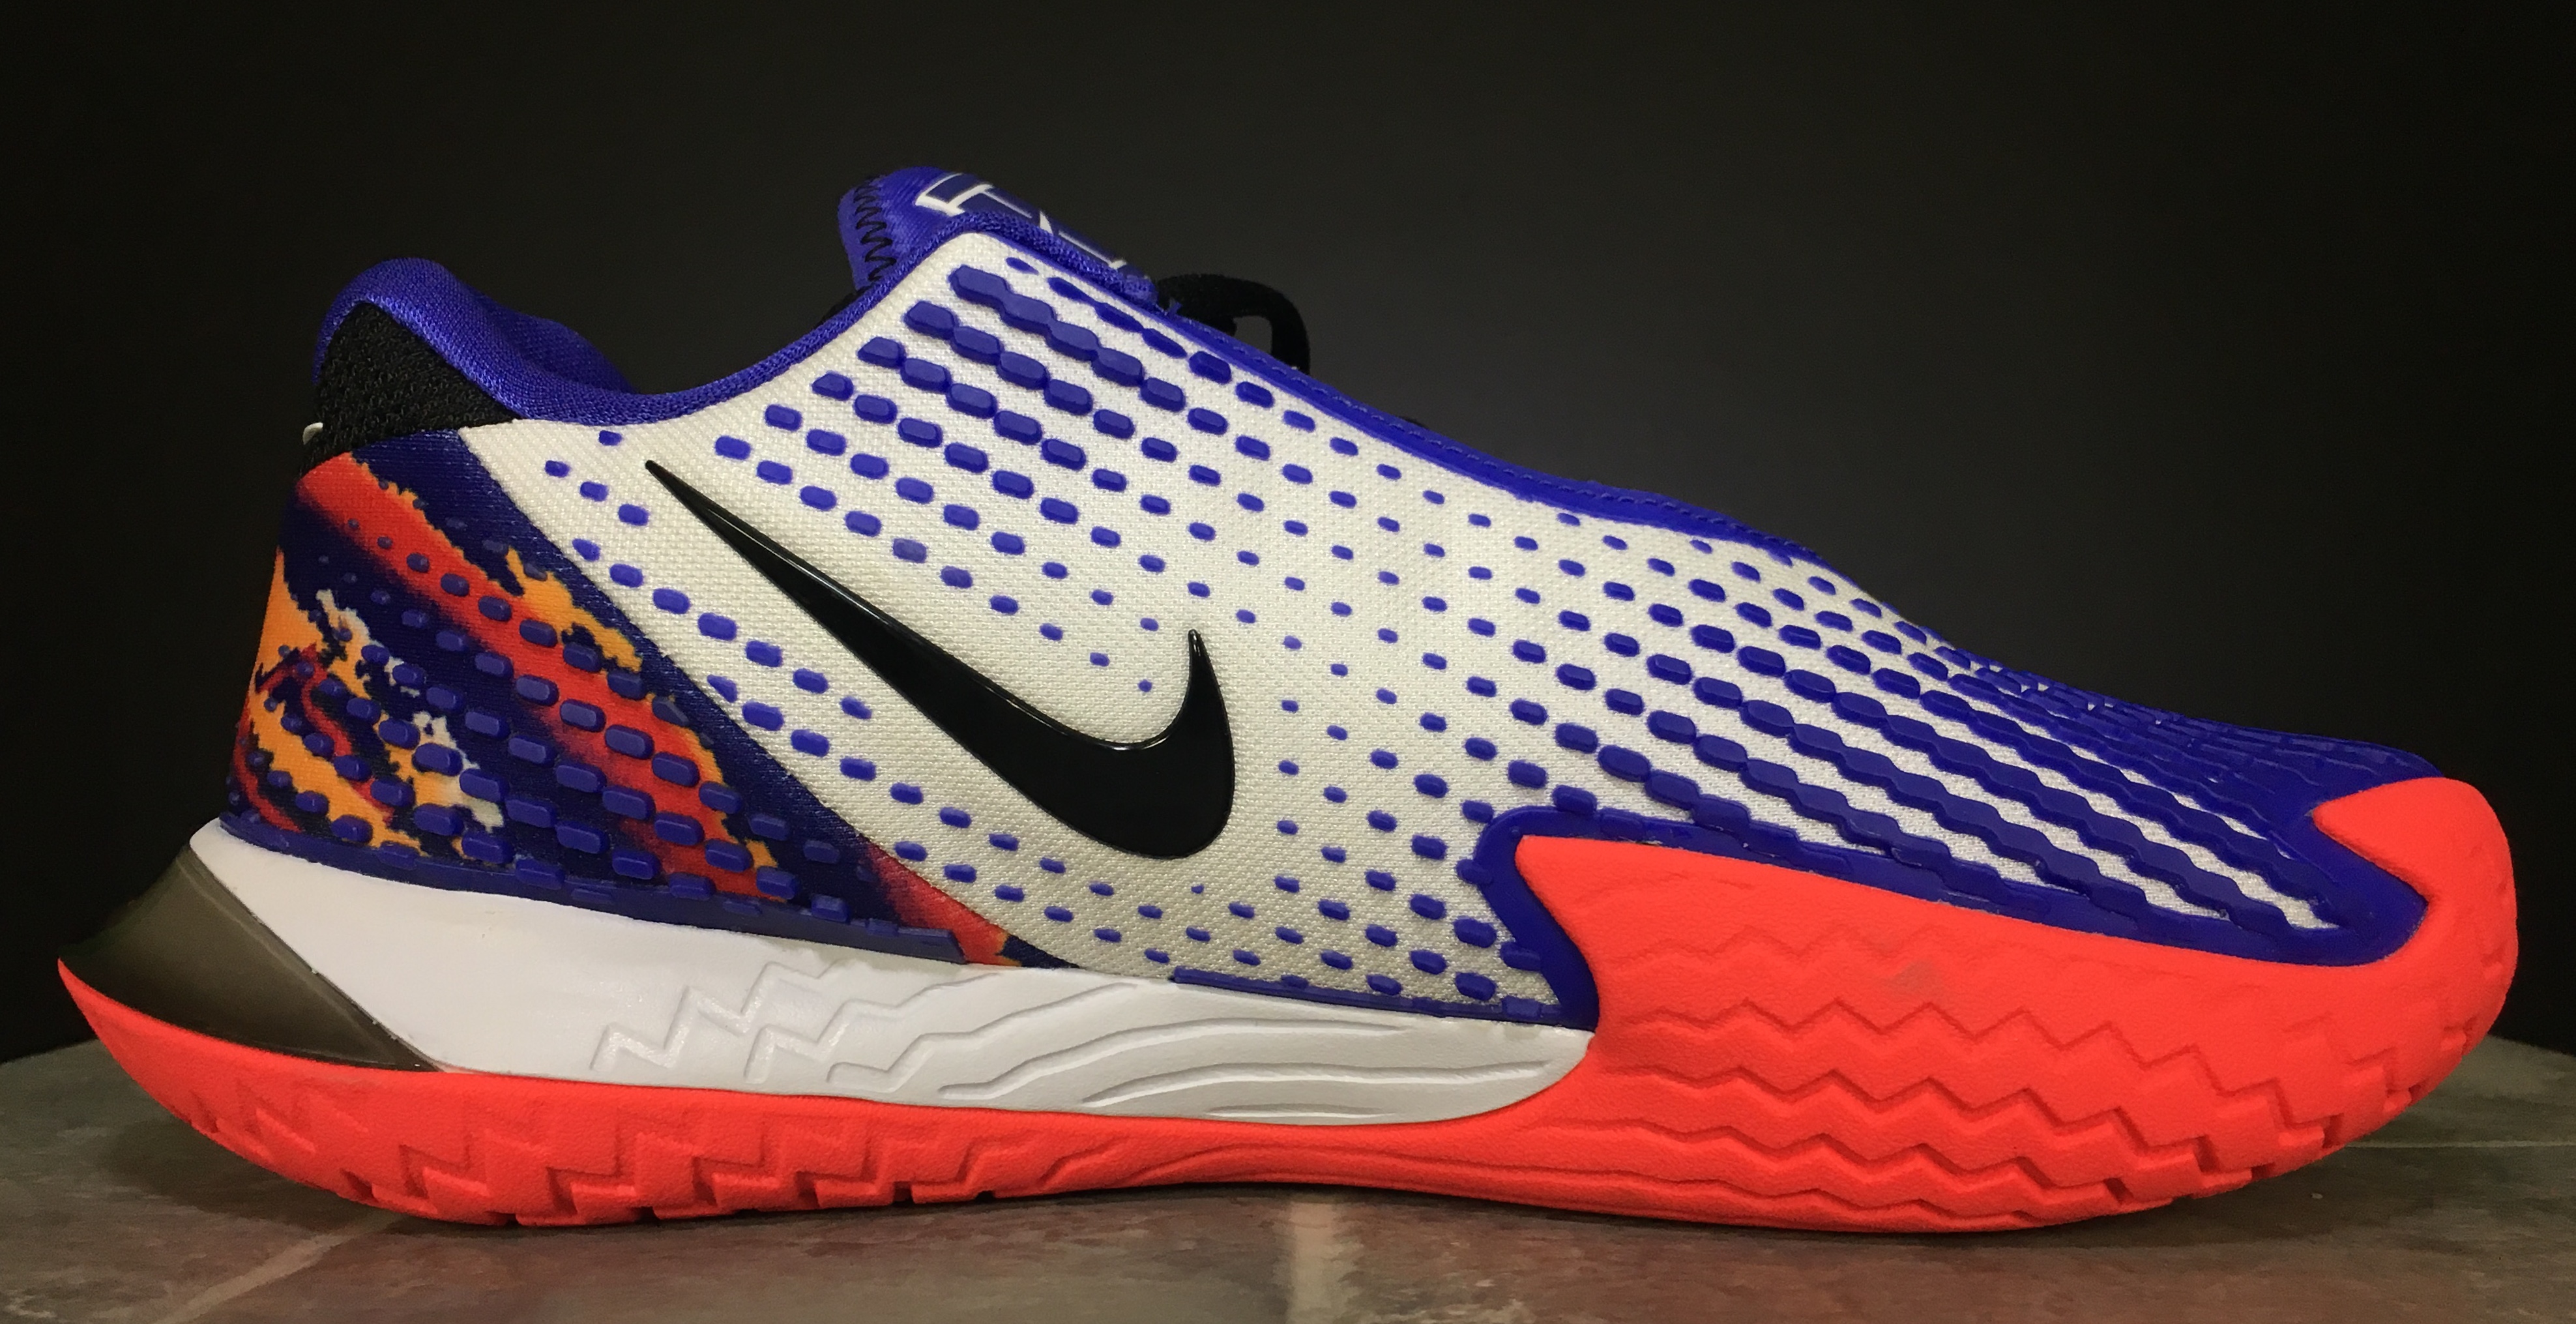 Nike Launches the Air Zoom Vapor Cage 4 - TENNIS EXPRESS BLOG